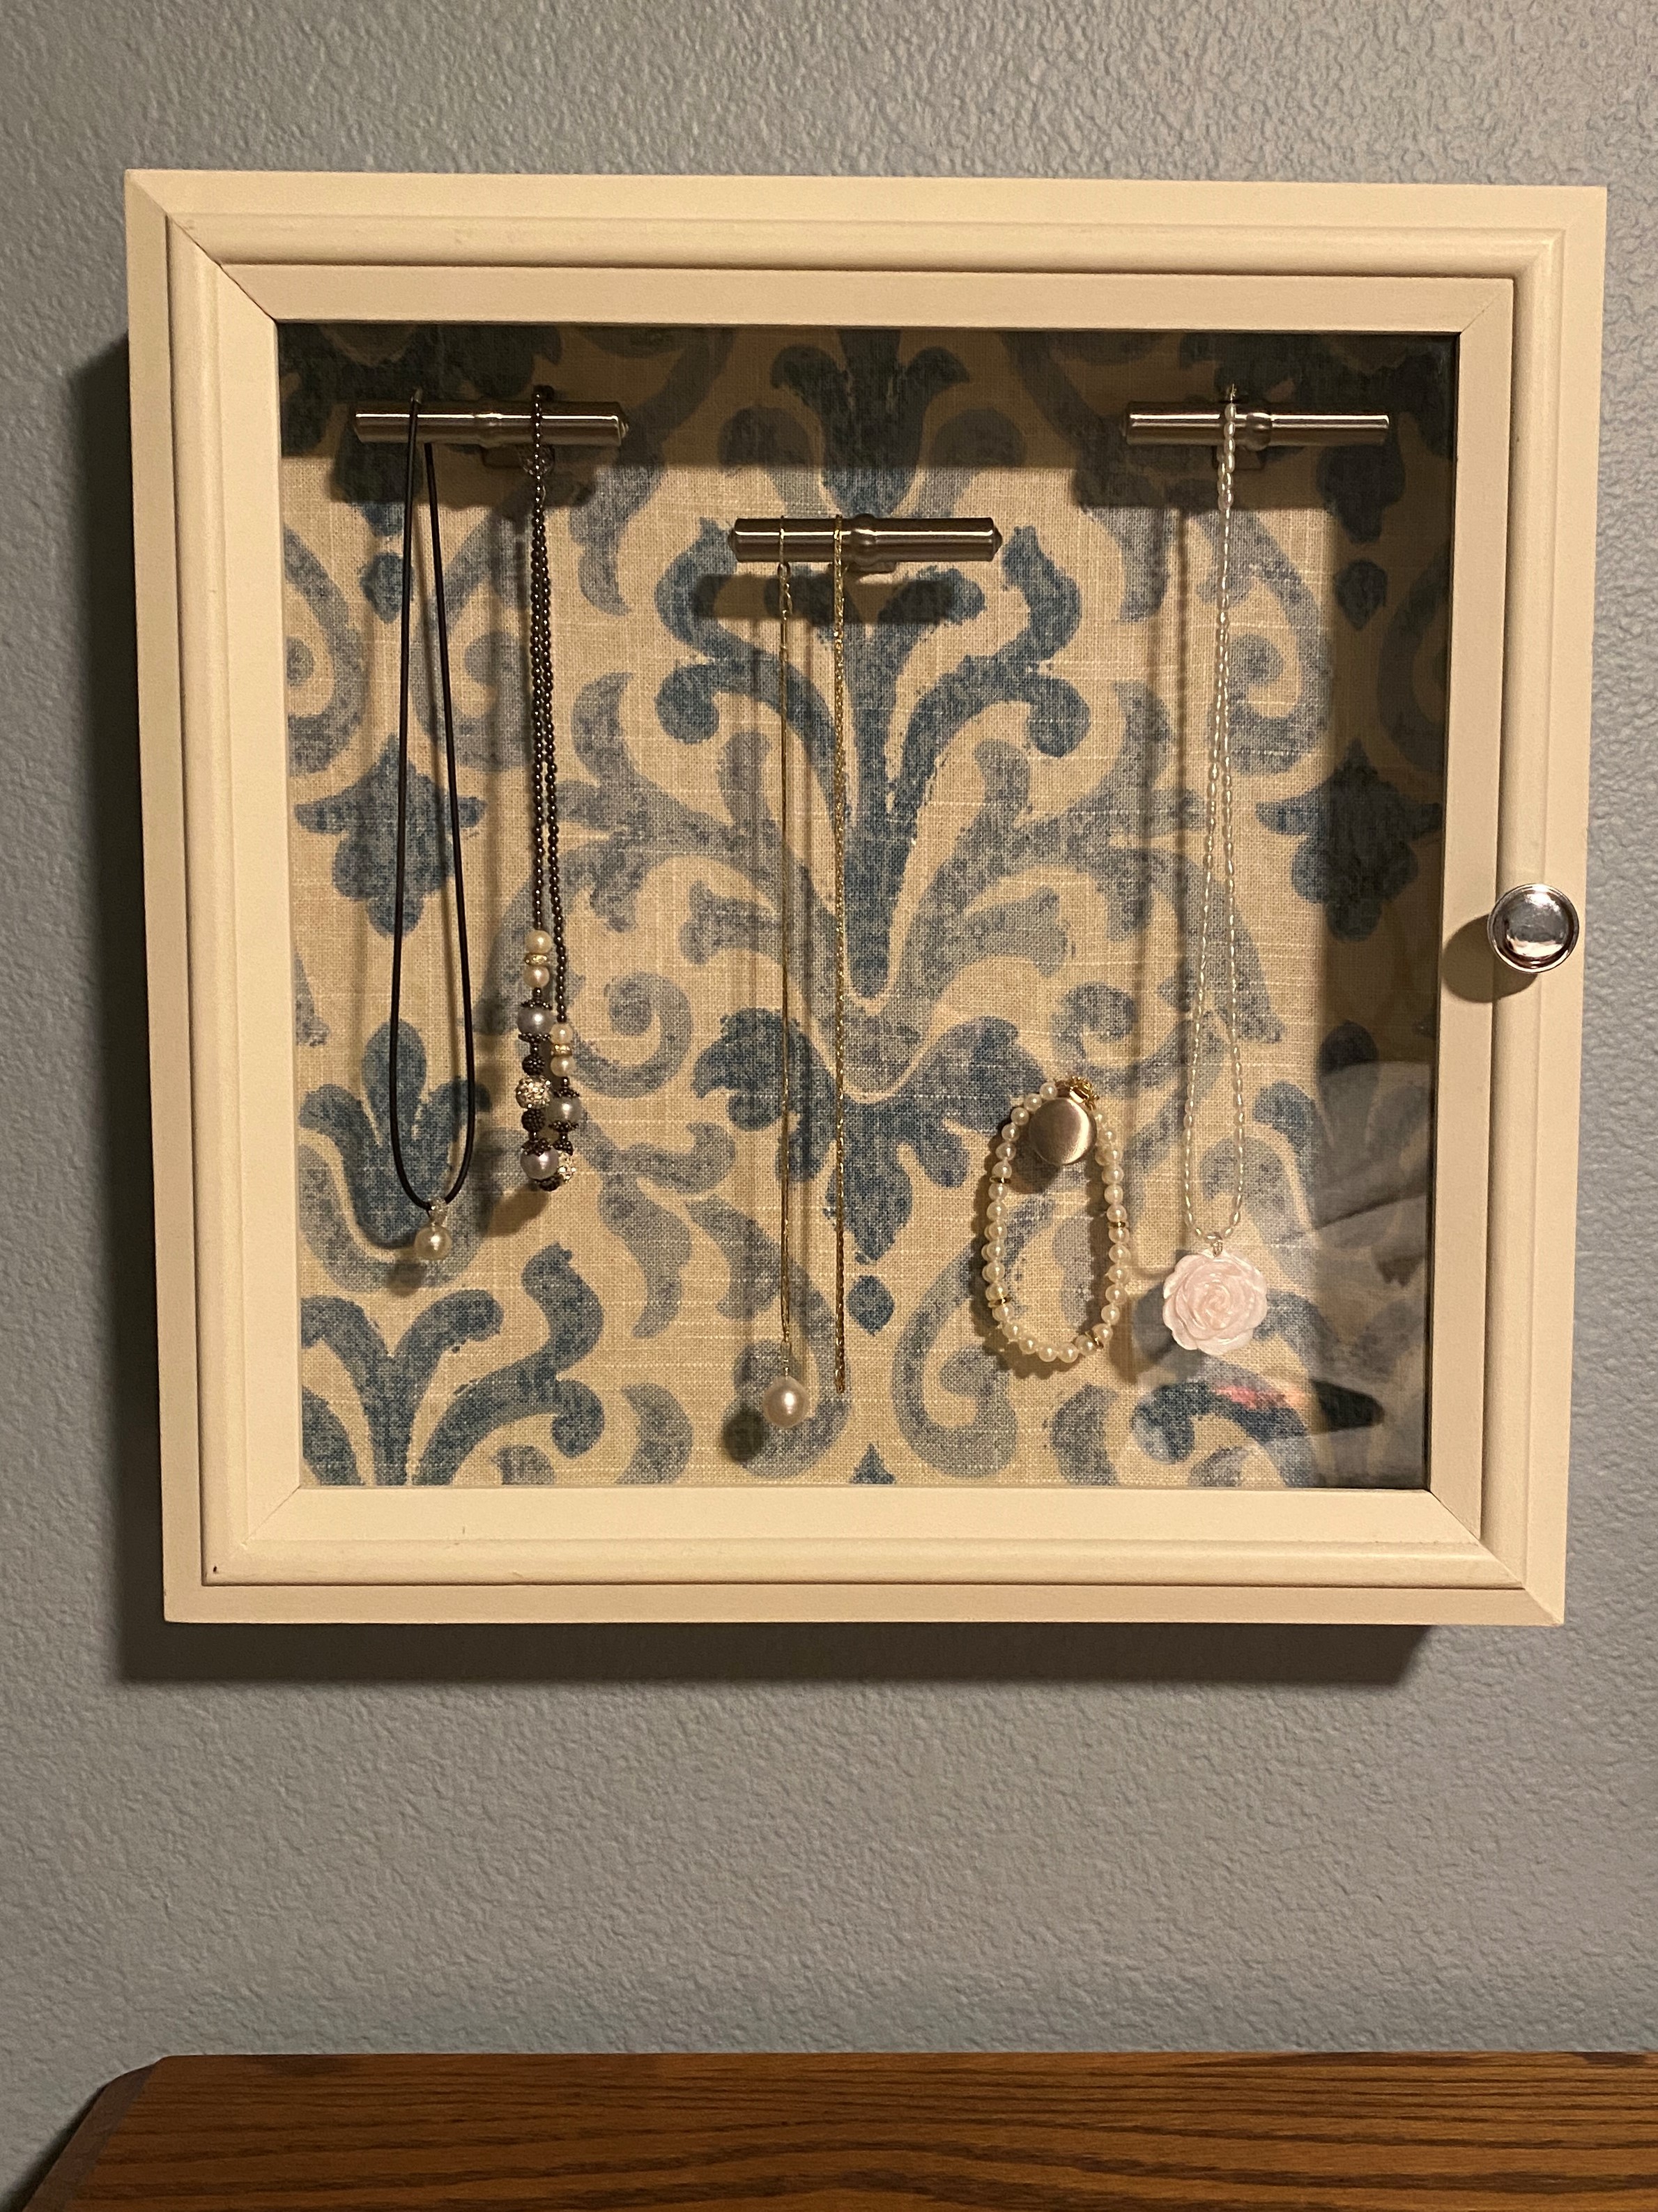 pearl picture frame storage - My earrings and rings fit nicely on the frame's base shelf below the pearls